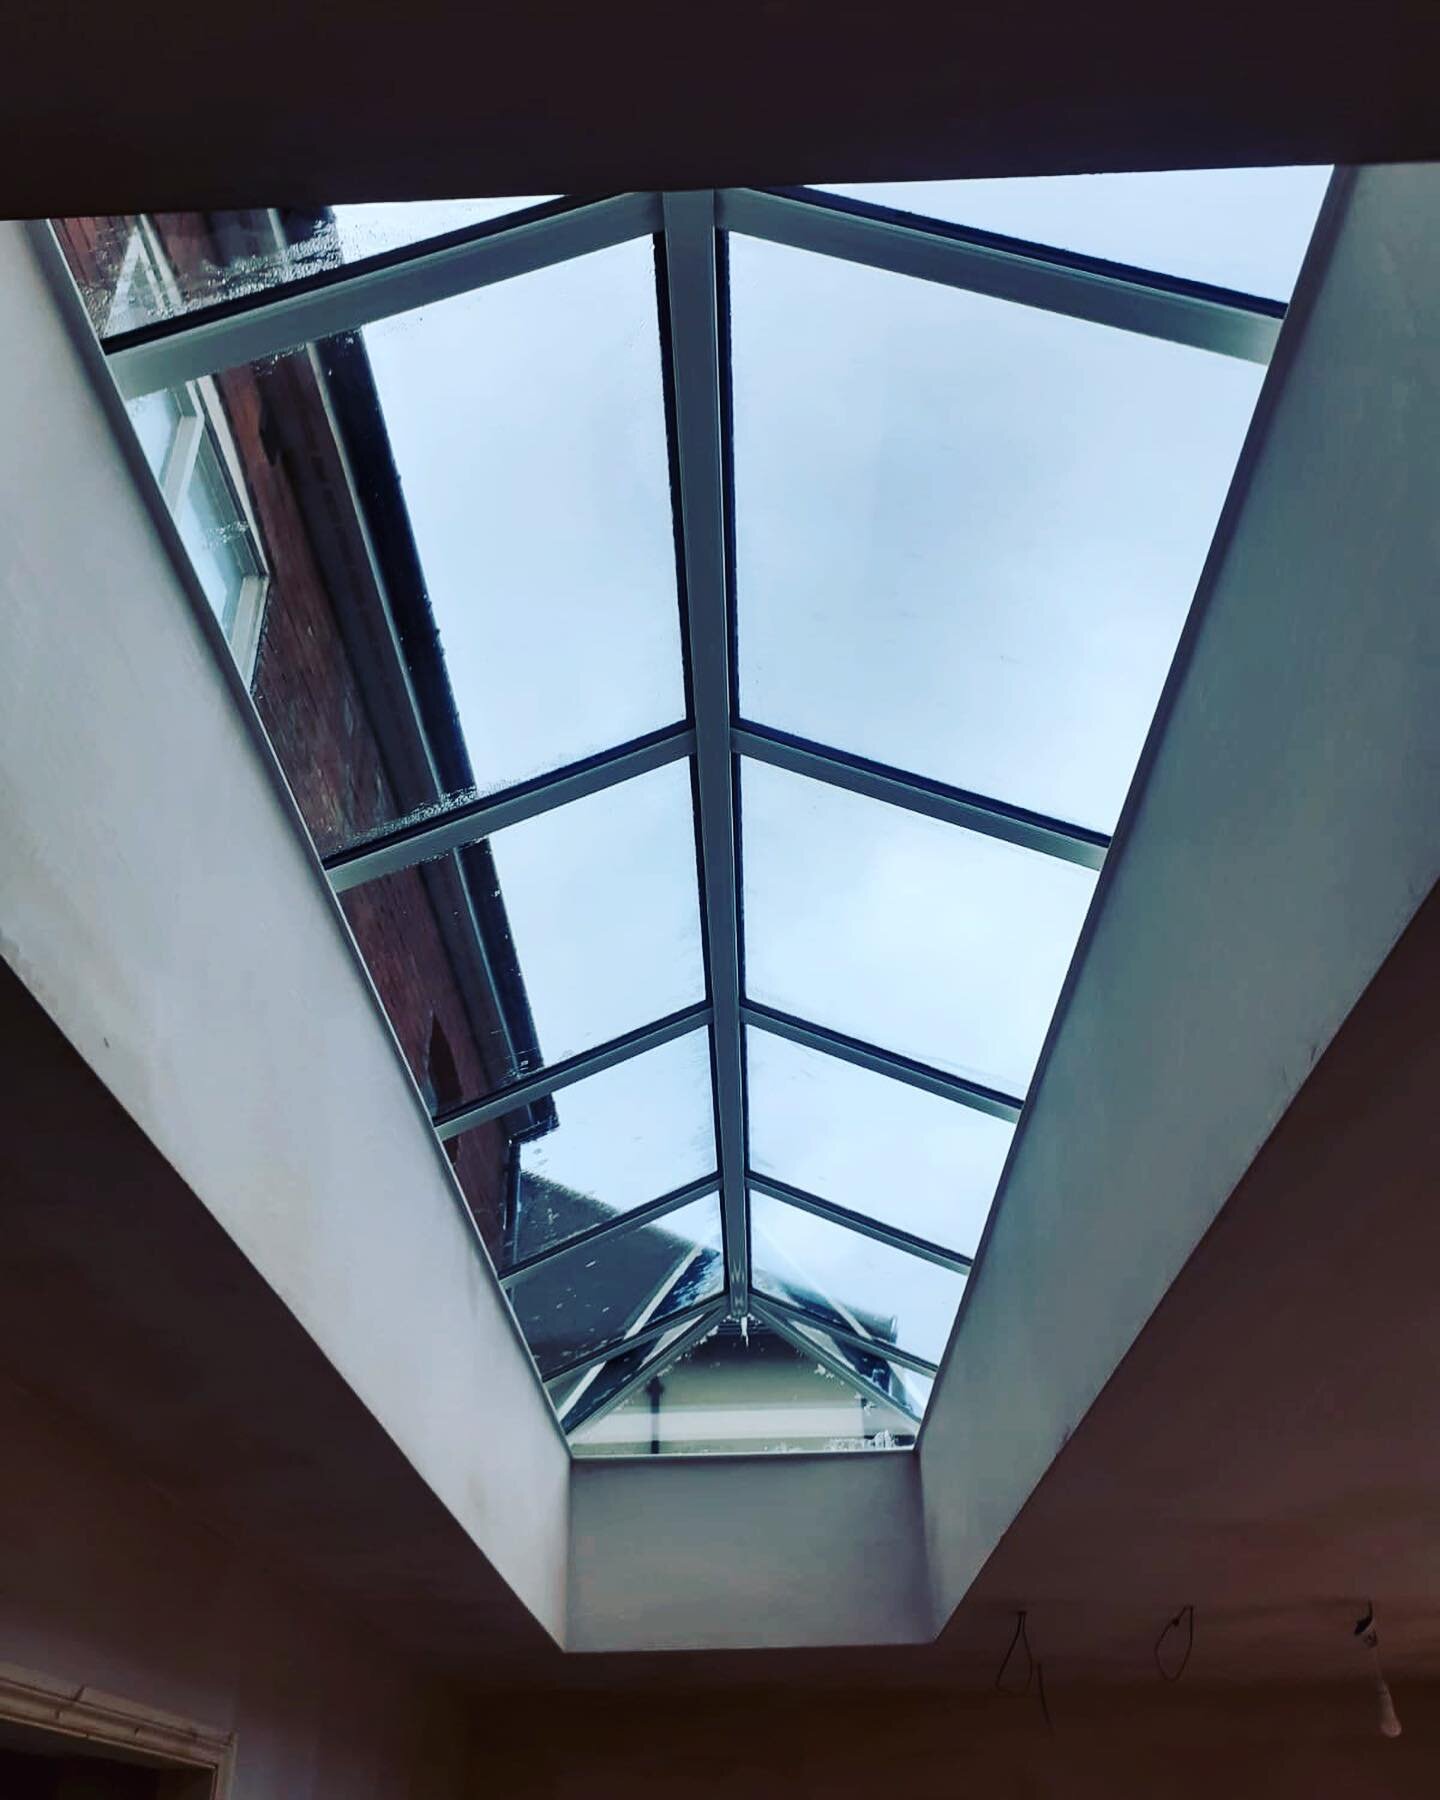 6M Latern installed last year for one of our customers. This looked beautiful and really made a difference to the space. #latern #window #space #renovation #inspiration #makingahouseahome #building #builders #inspo #builder #tradesman #trade #chisleh